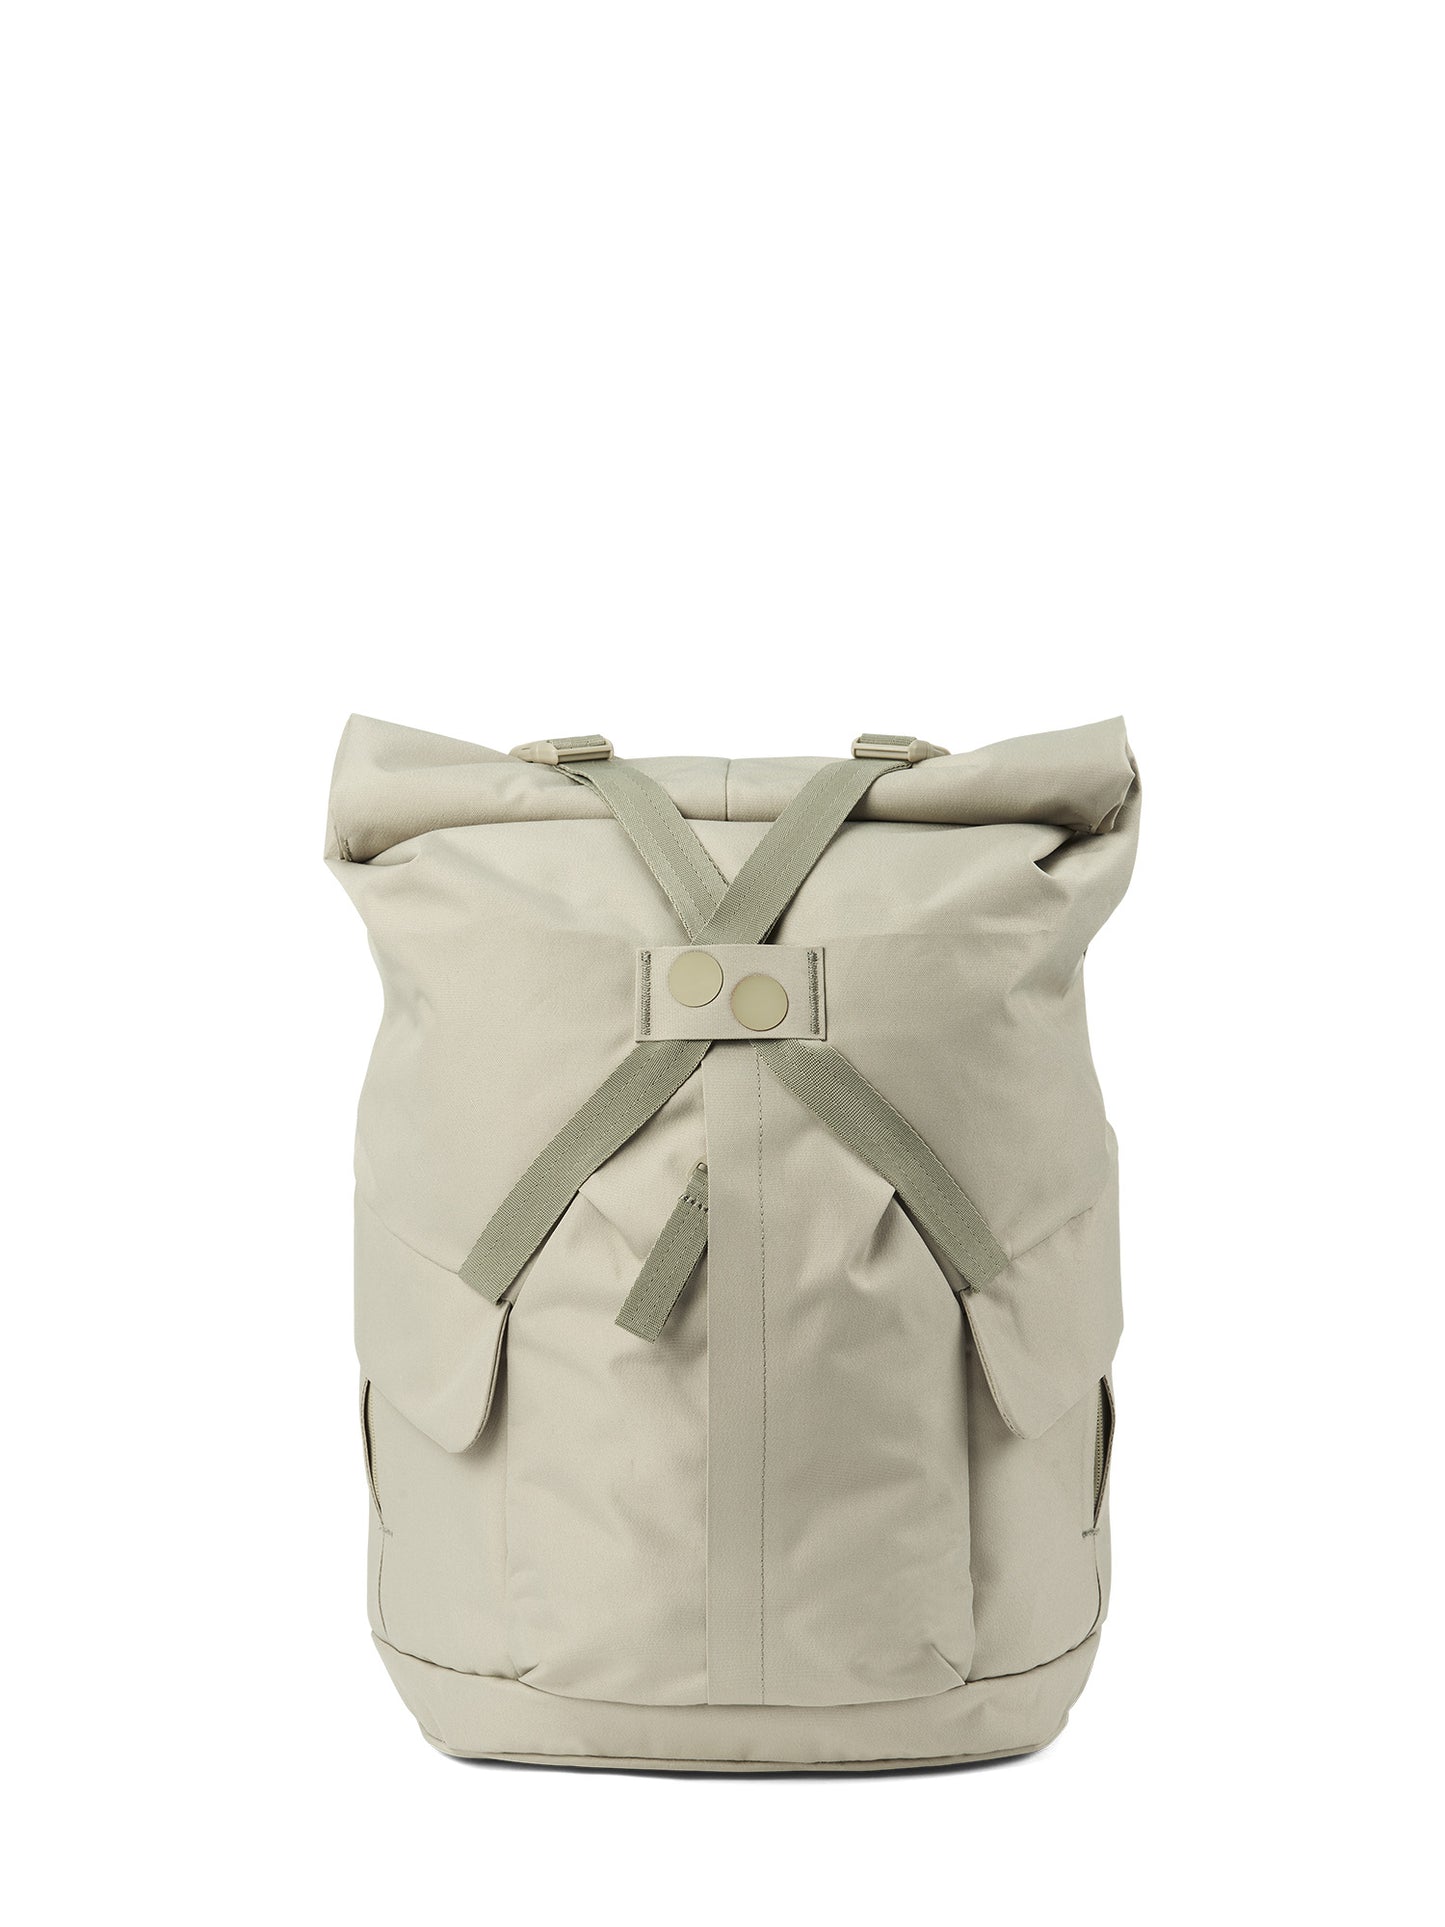 pinqponq-Kross-Reed-Olive-front